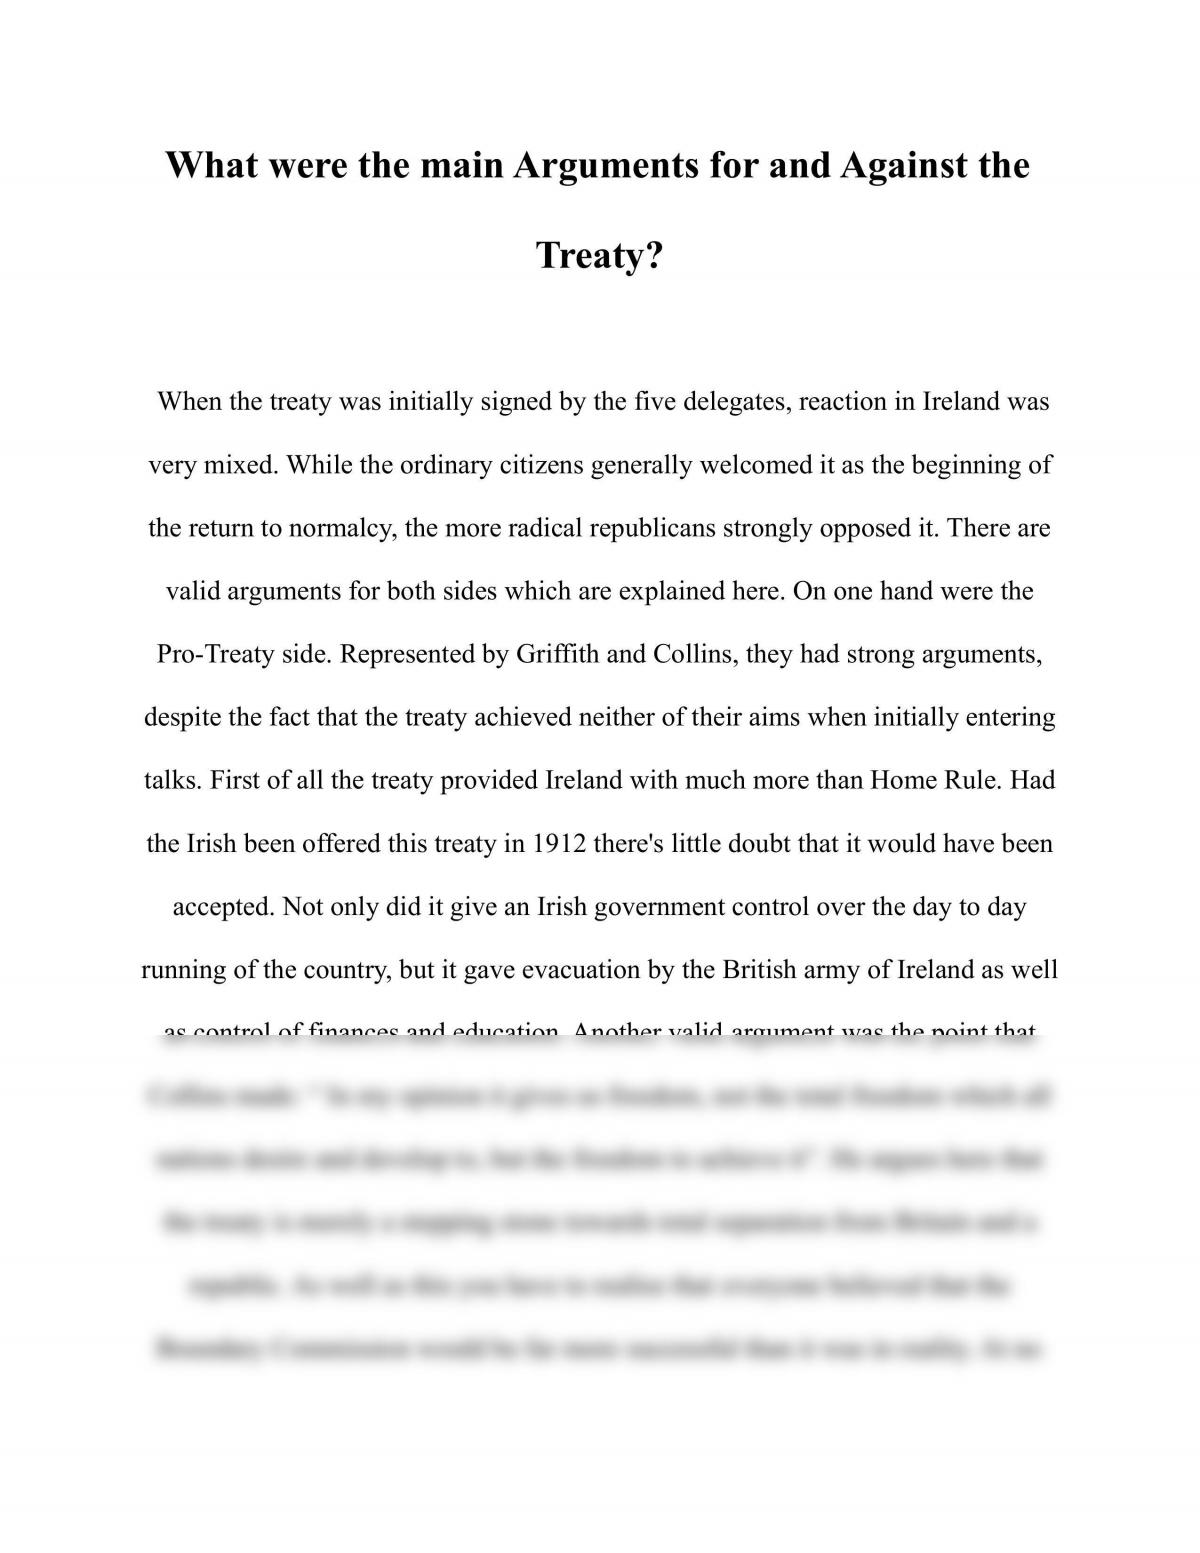 What were the main Arguments for and Against the Treaty? - Page 1